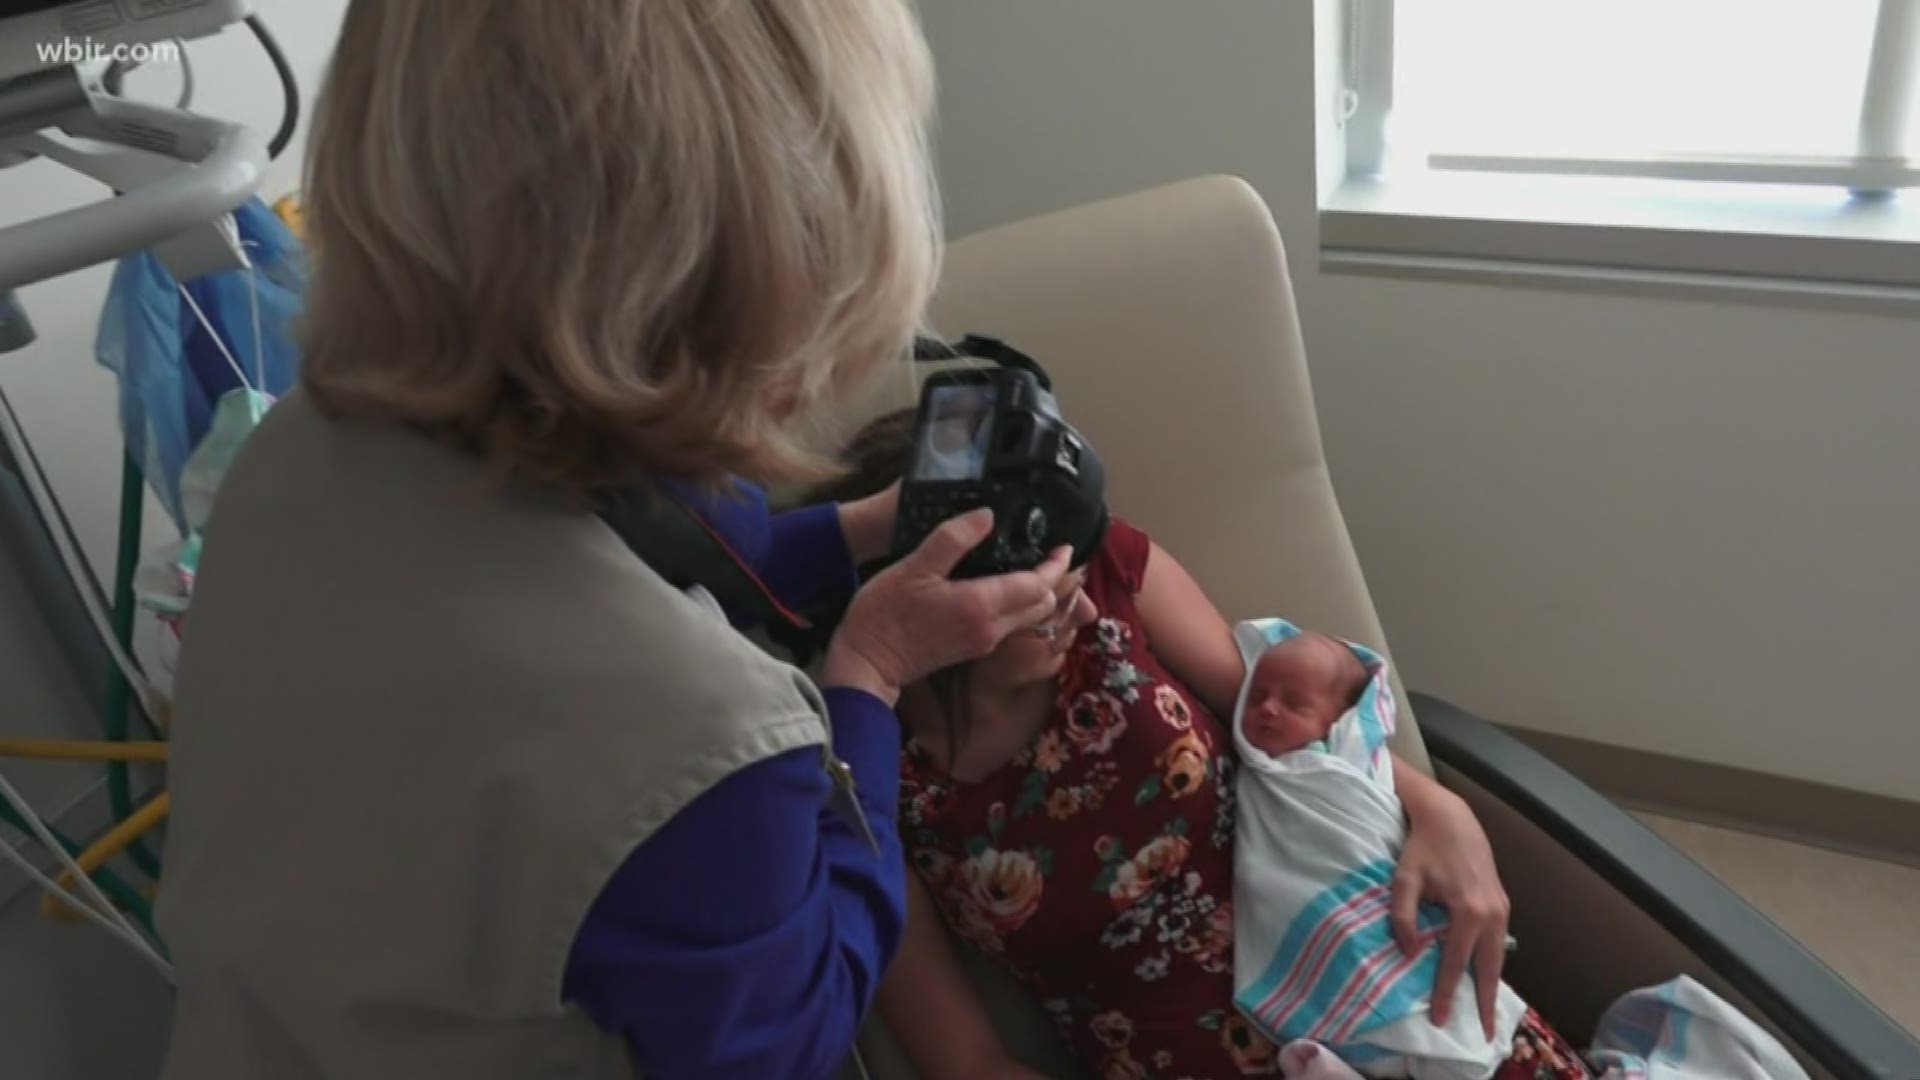 The hospital's tiniest patients aren't camera shy.